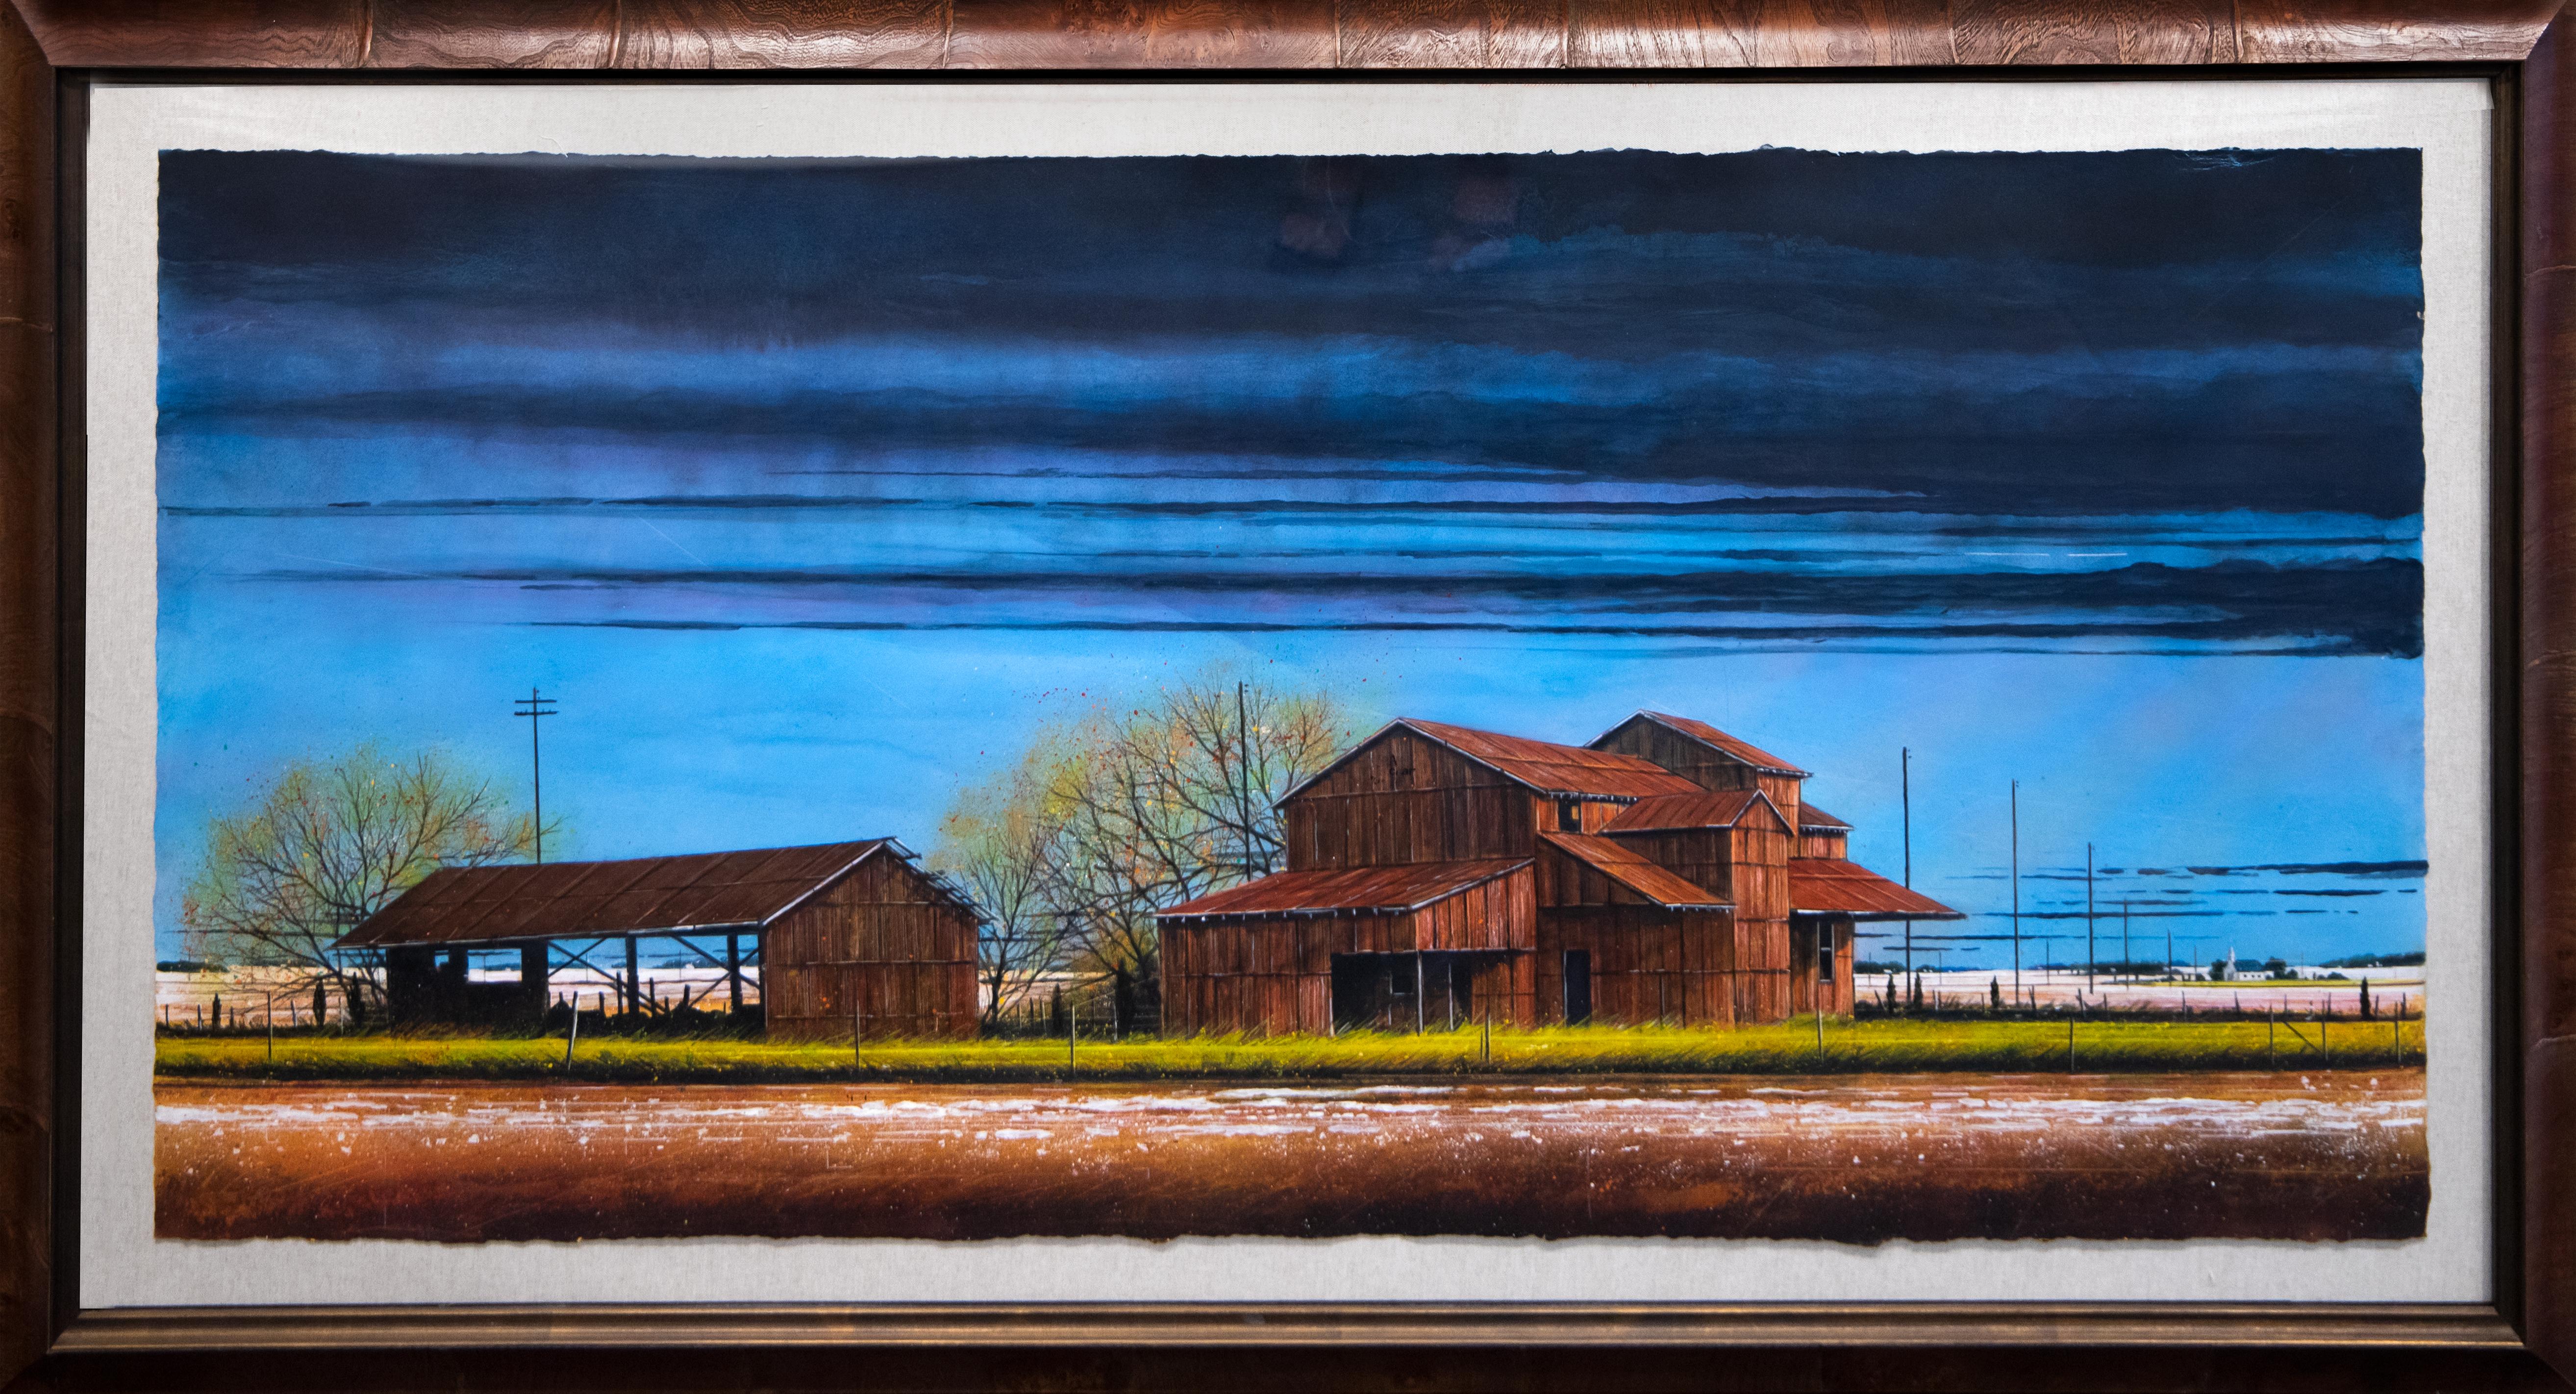 Flat Out-Barns - Mixed Media Art by William Dunlap